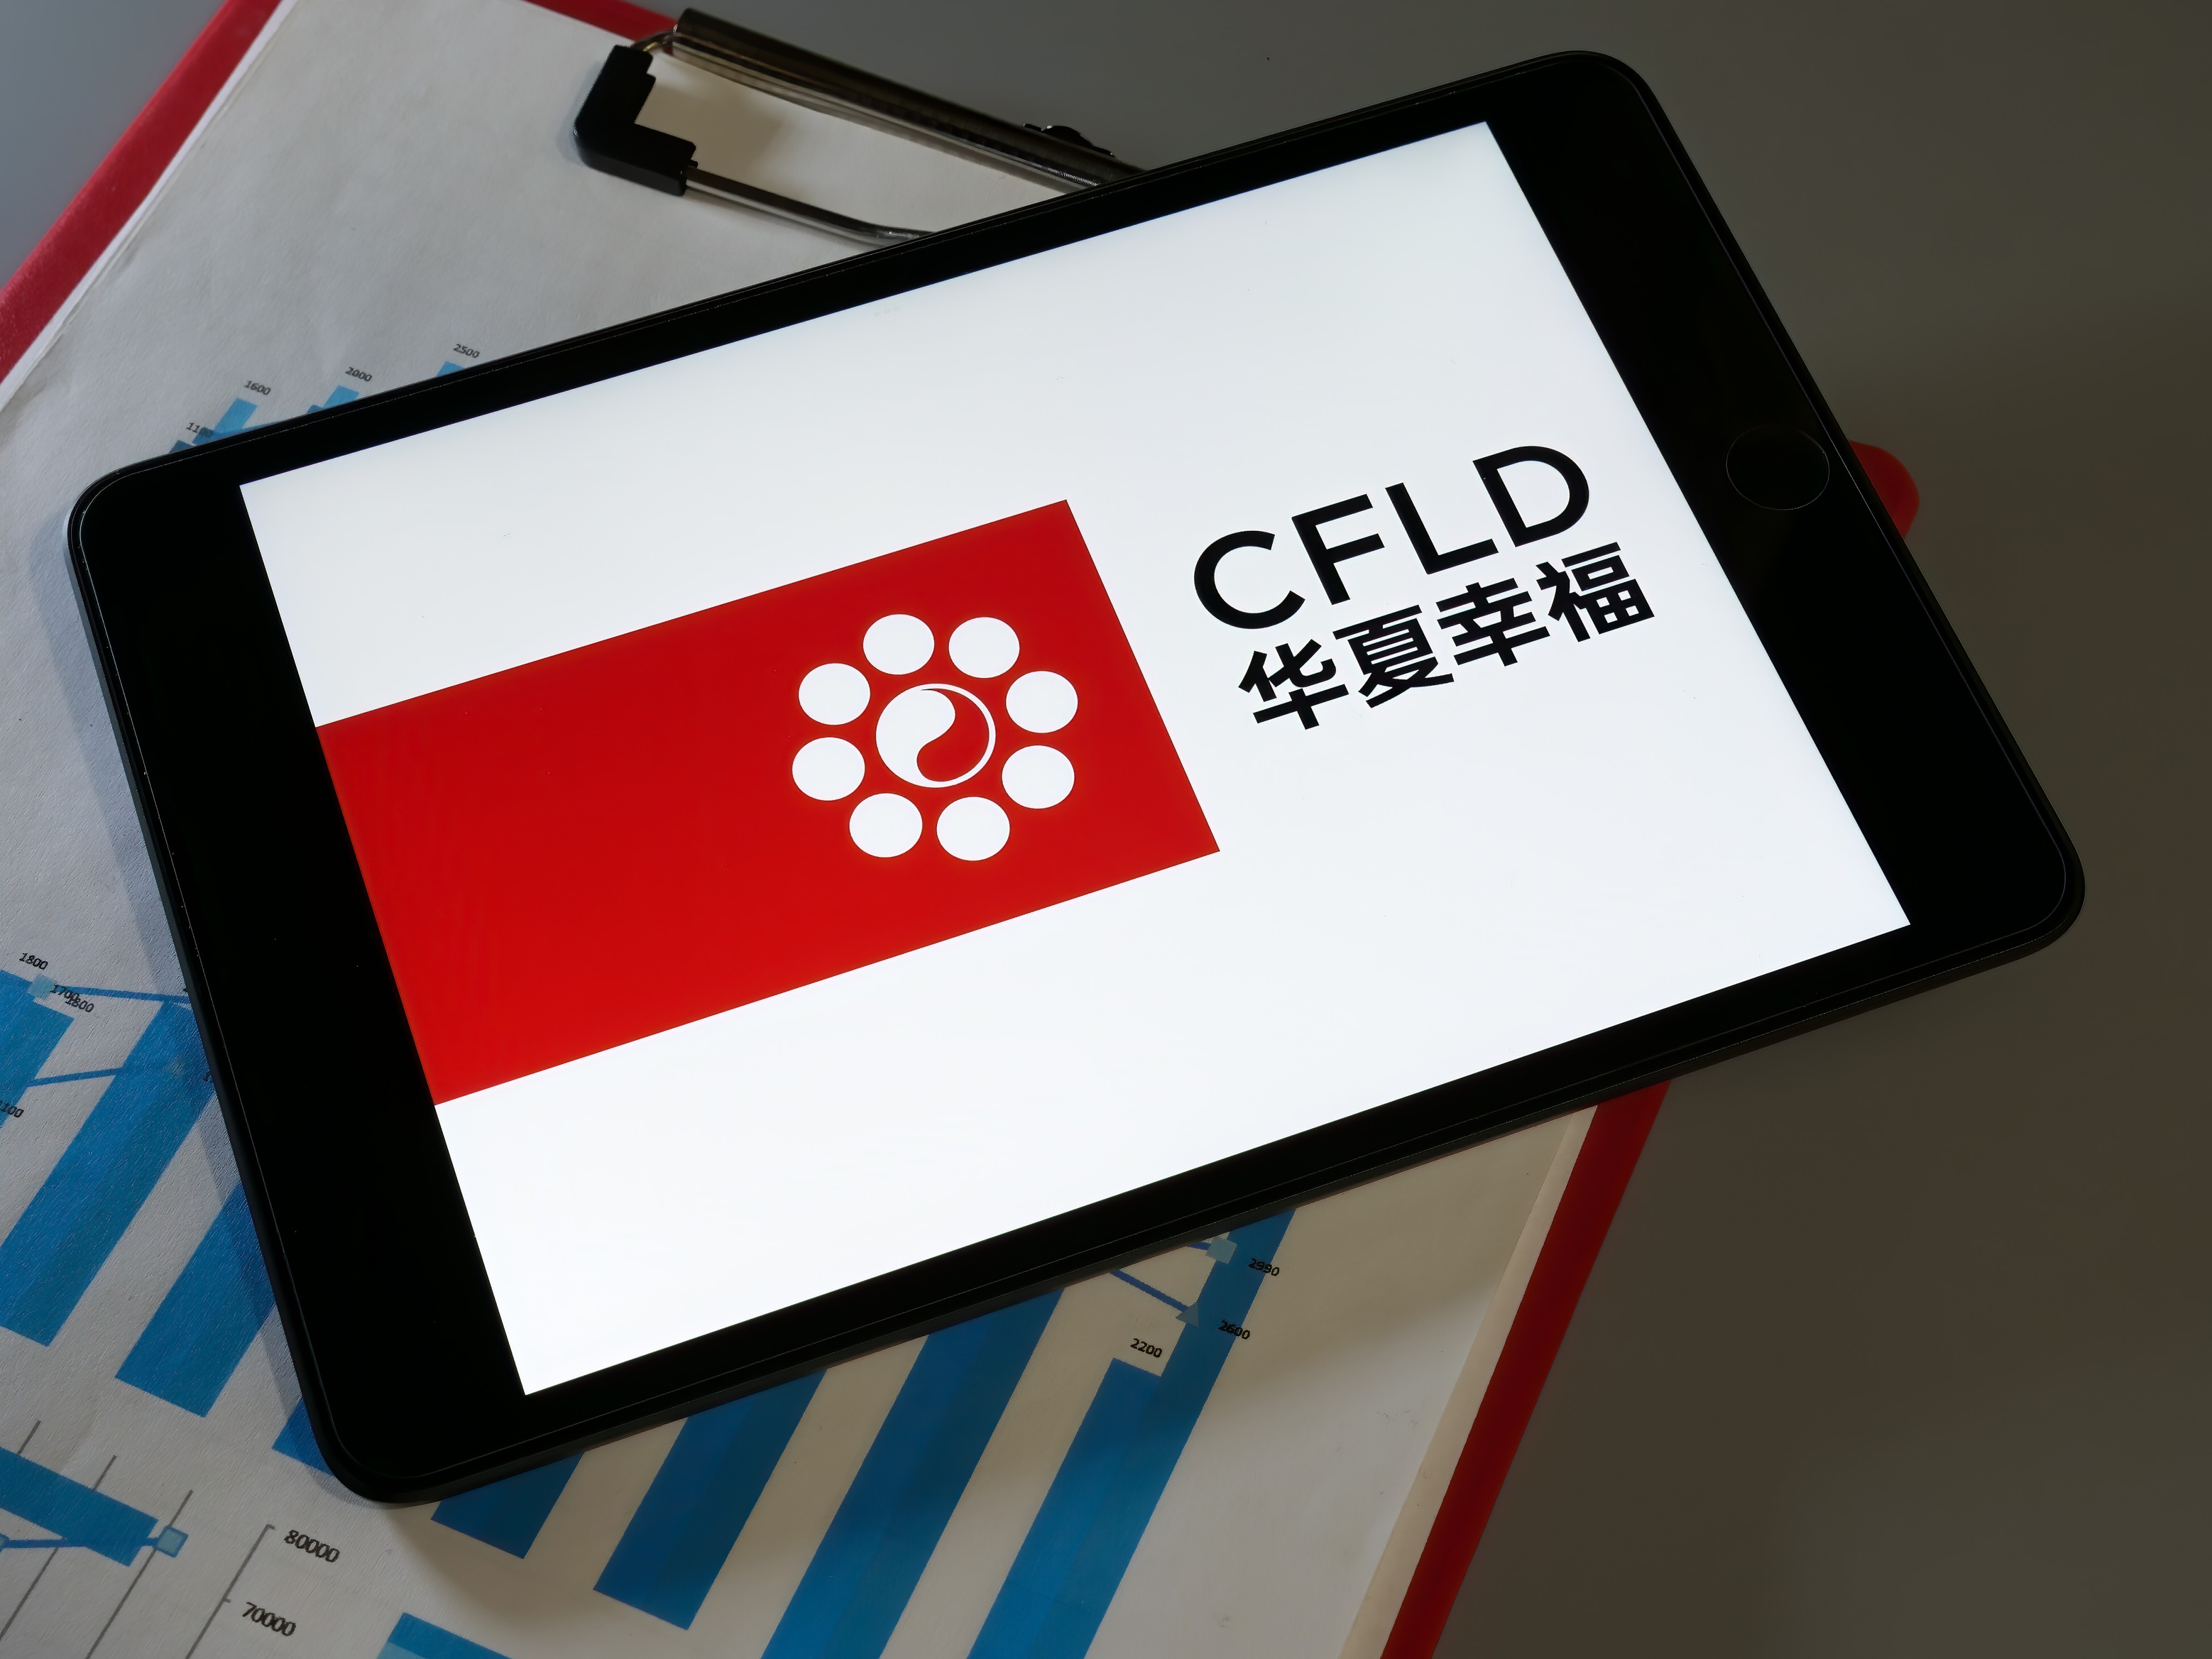 China Fortune Land was among the first mainland developers to default on its debt. Photo: Shutterstock